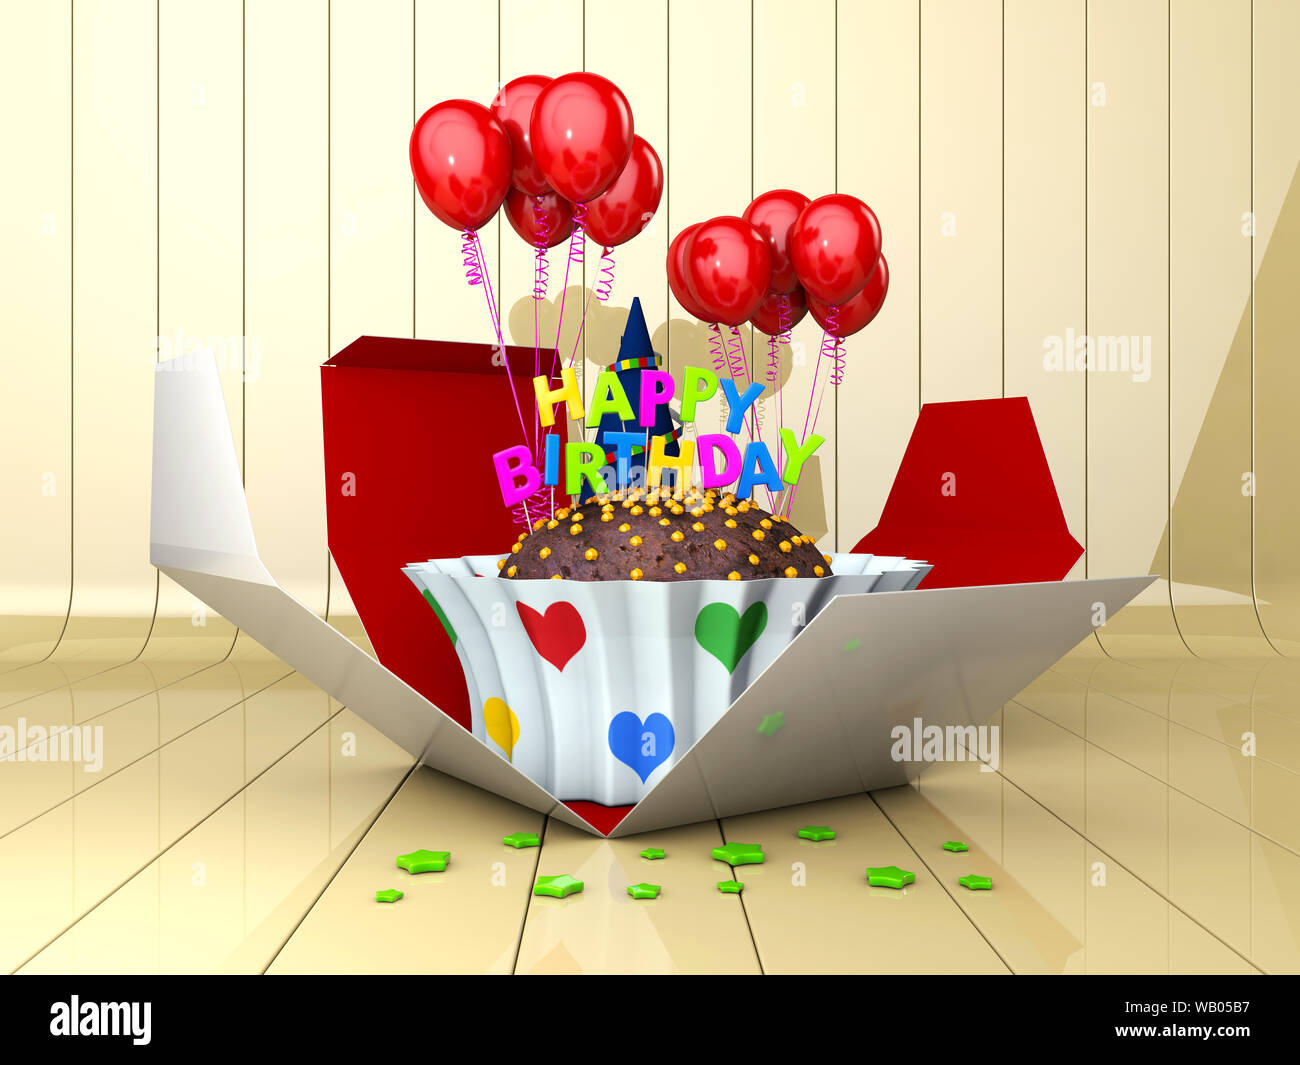 3d Illustration of Birthday cake with red balloons Stock Photo - Alamy